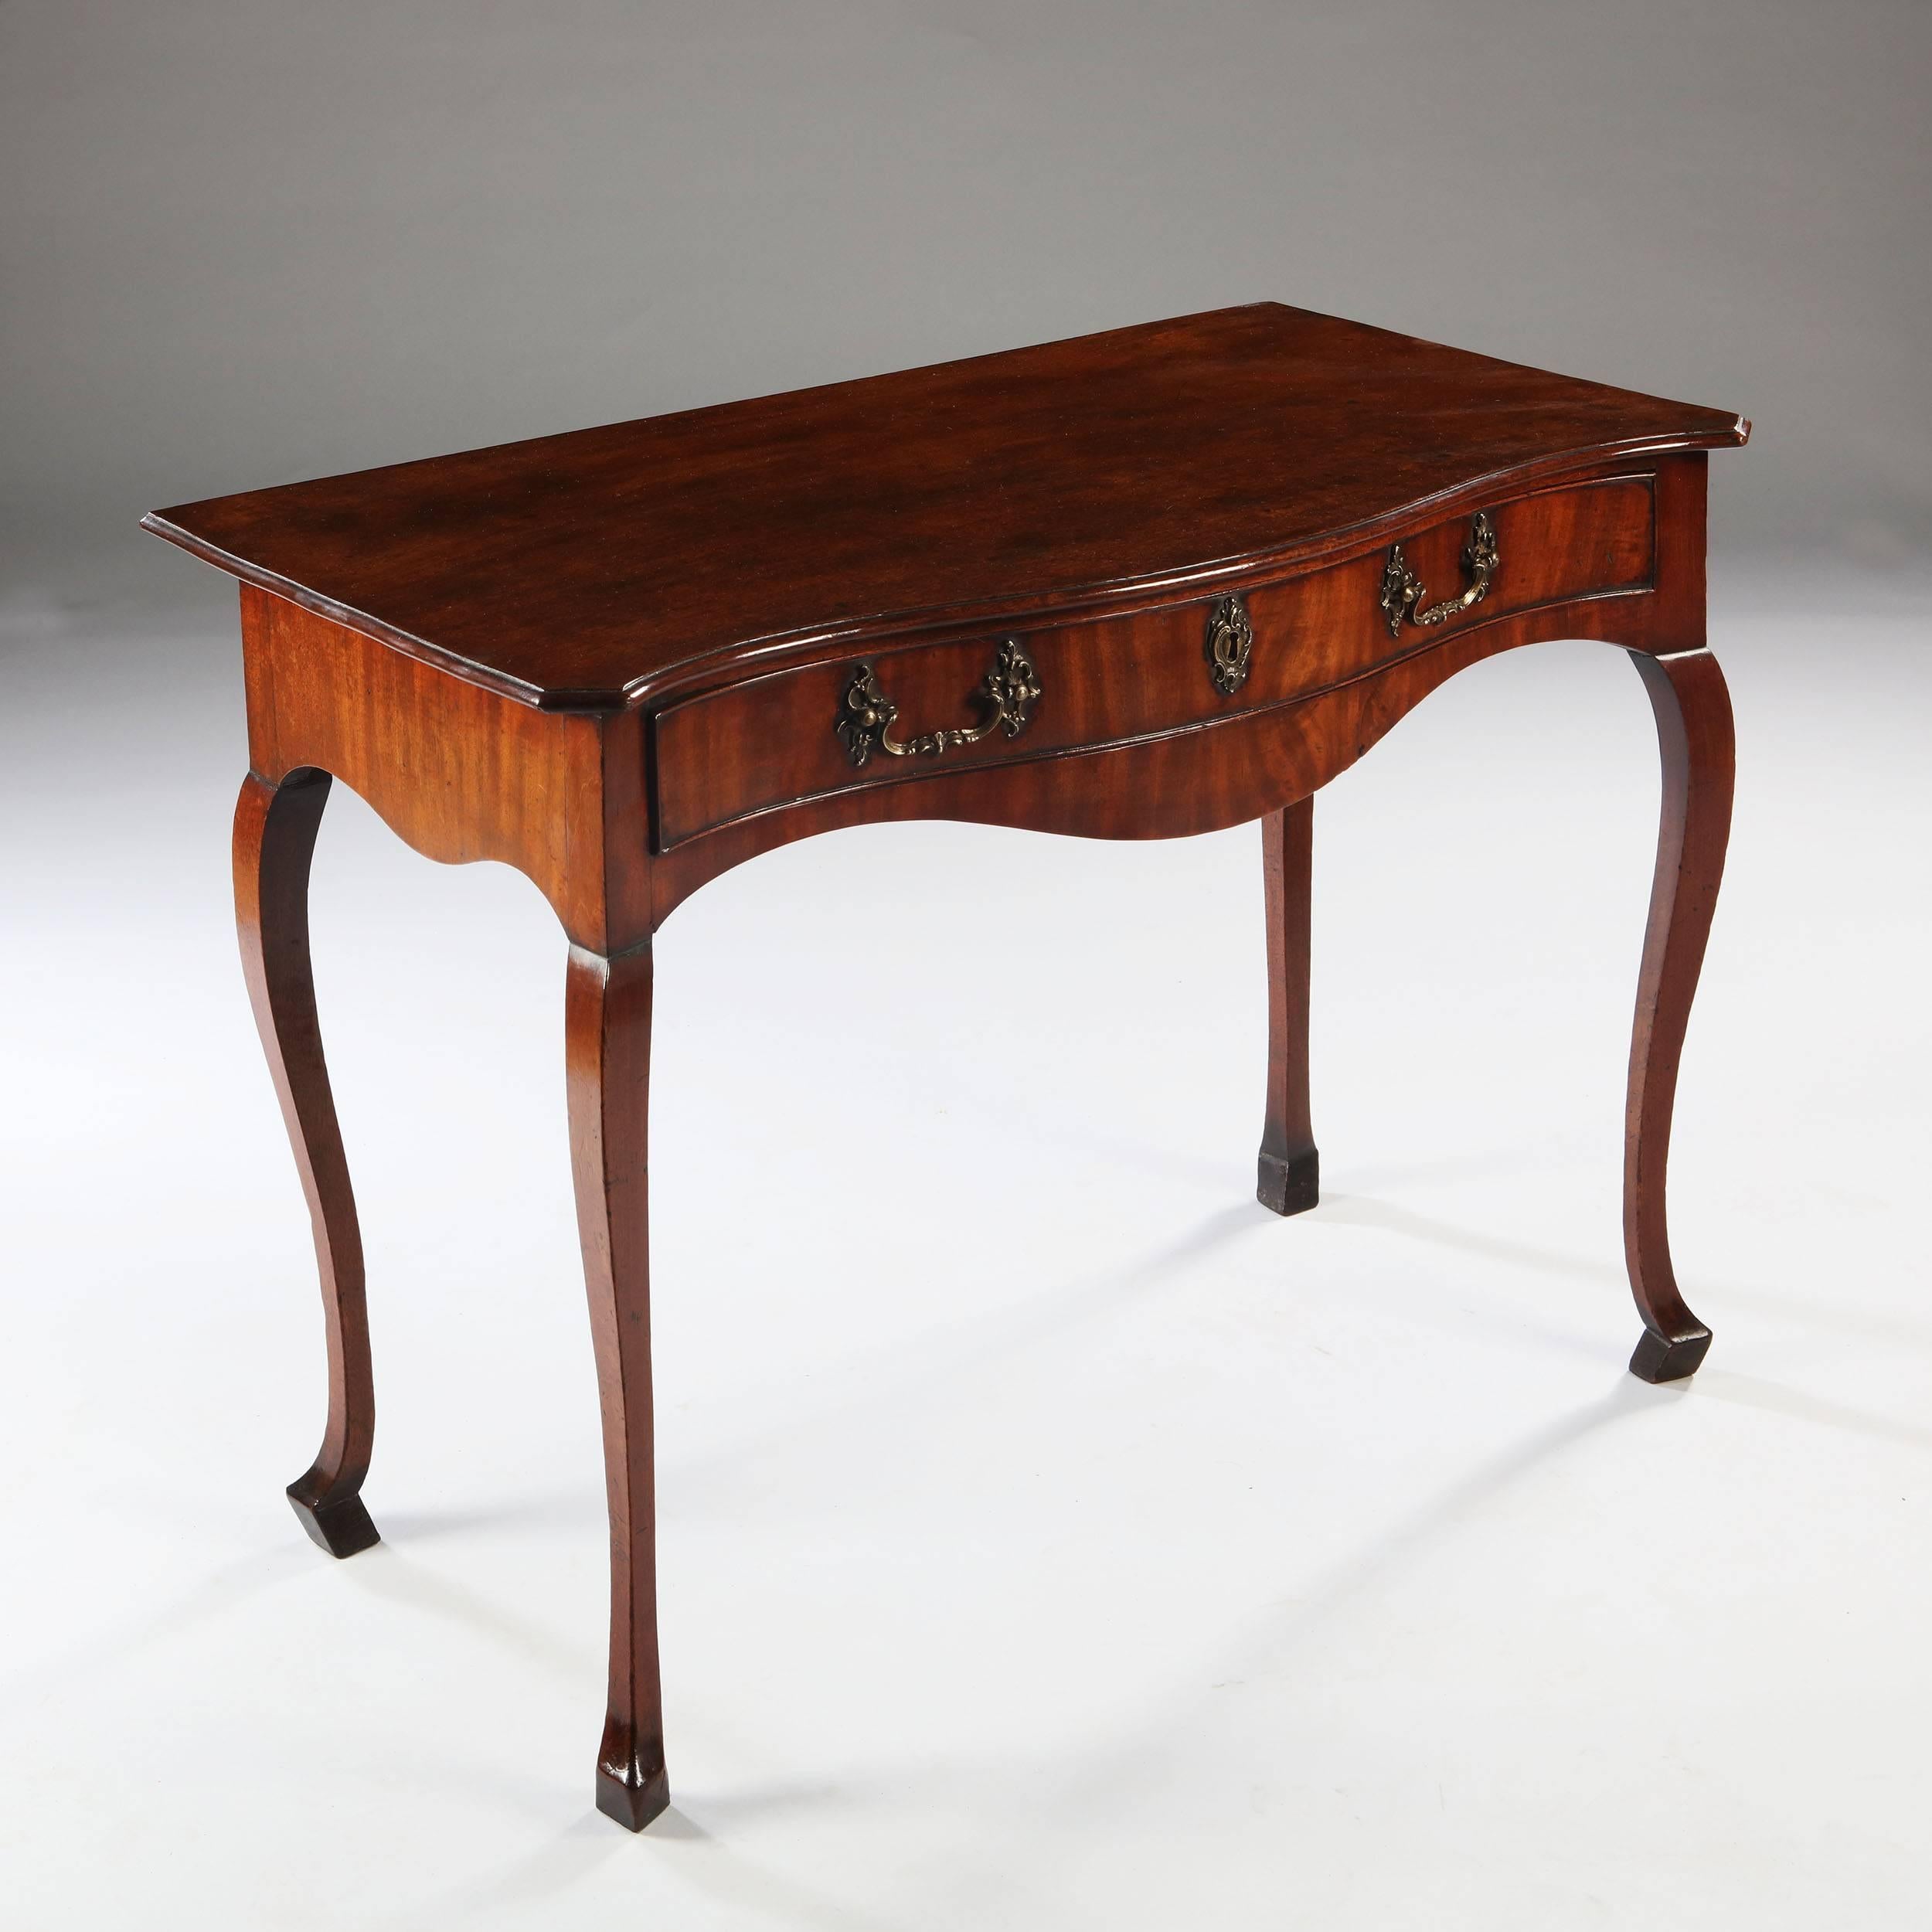 Very elegant serpentine fronted George III Chippendale side table.

England, circa 1780

Measures: Height 71cm (28in)
Width 90cm (35 1/2in)
Depth 50cm (19 3/4in)

A very elegant serpentine fronted mahogany George III Chippendale side table ,